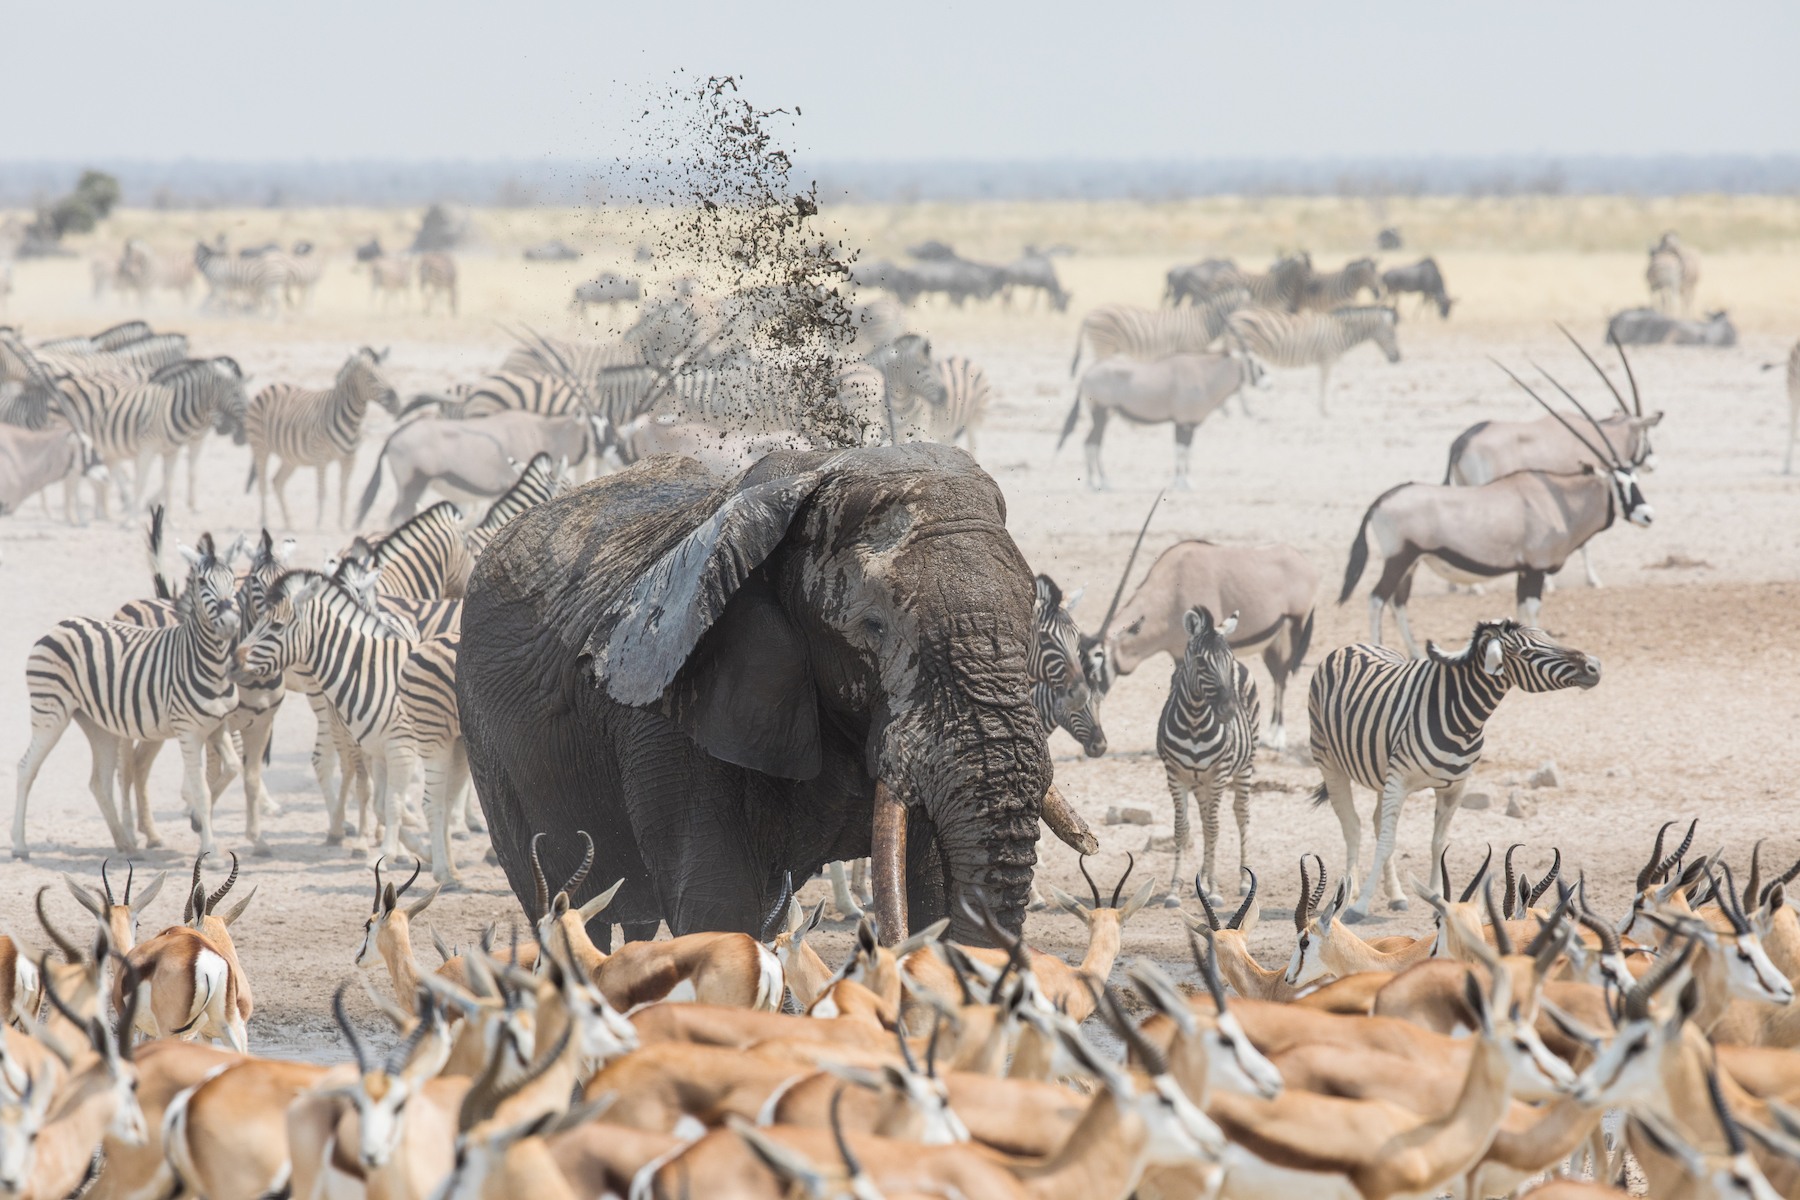 By September Etosha's water holes teem with life